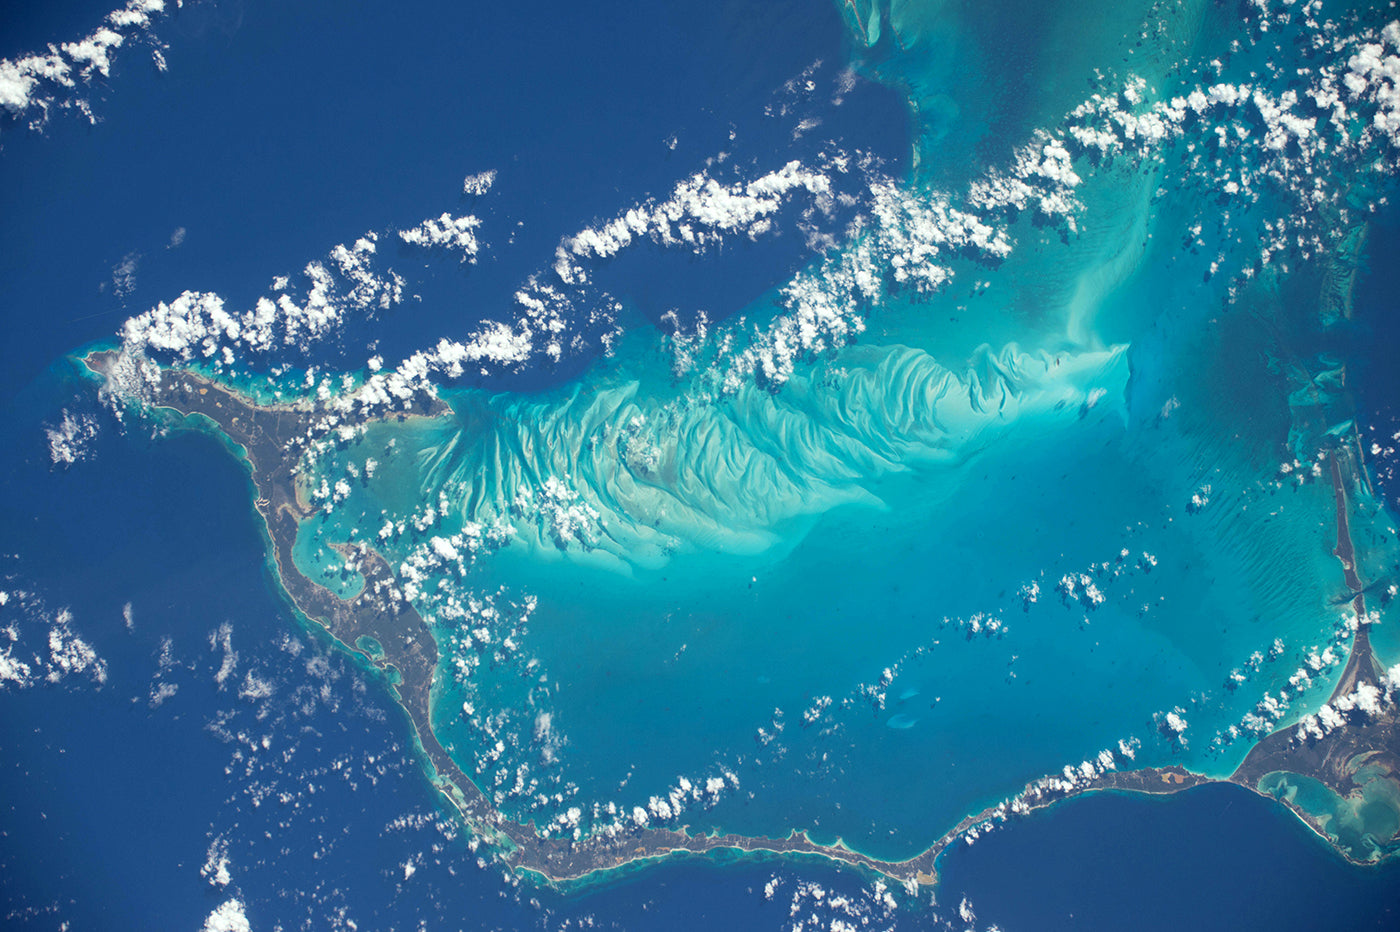 The Bahamas from space. Photo: Terry Virts